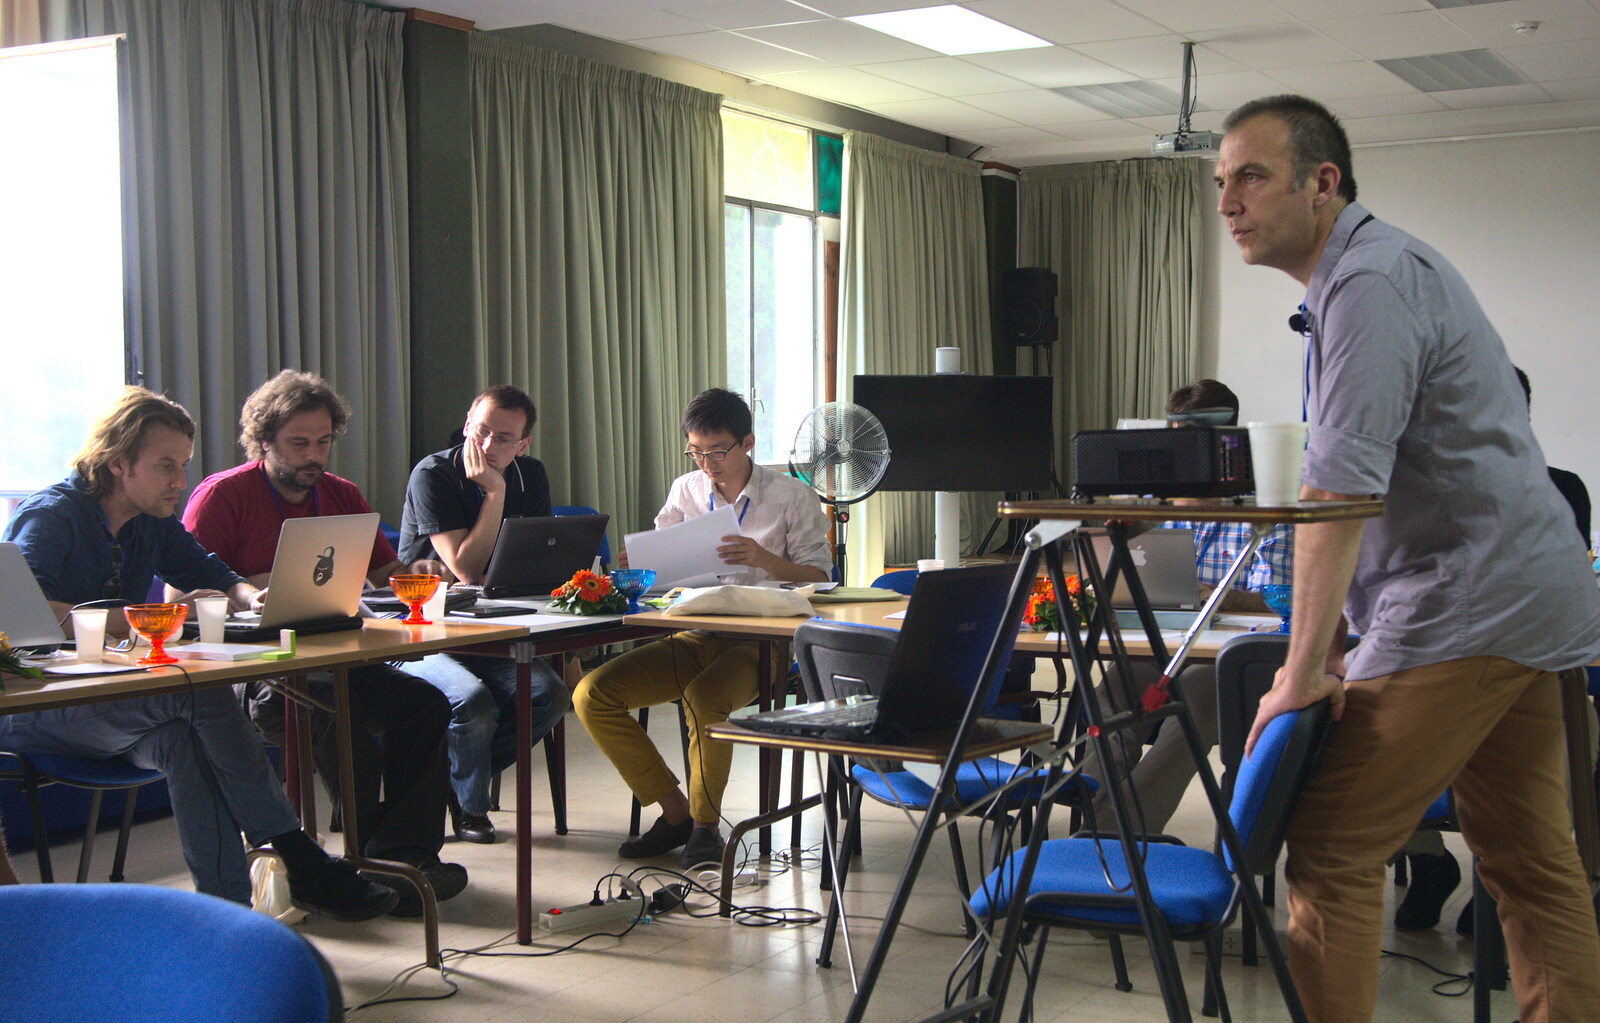 Back in the workshops, it's day two from The Open Education Challenge, Barcelona, Catalonia - 13th July 2014